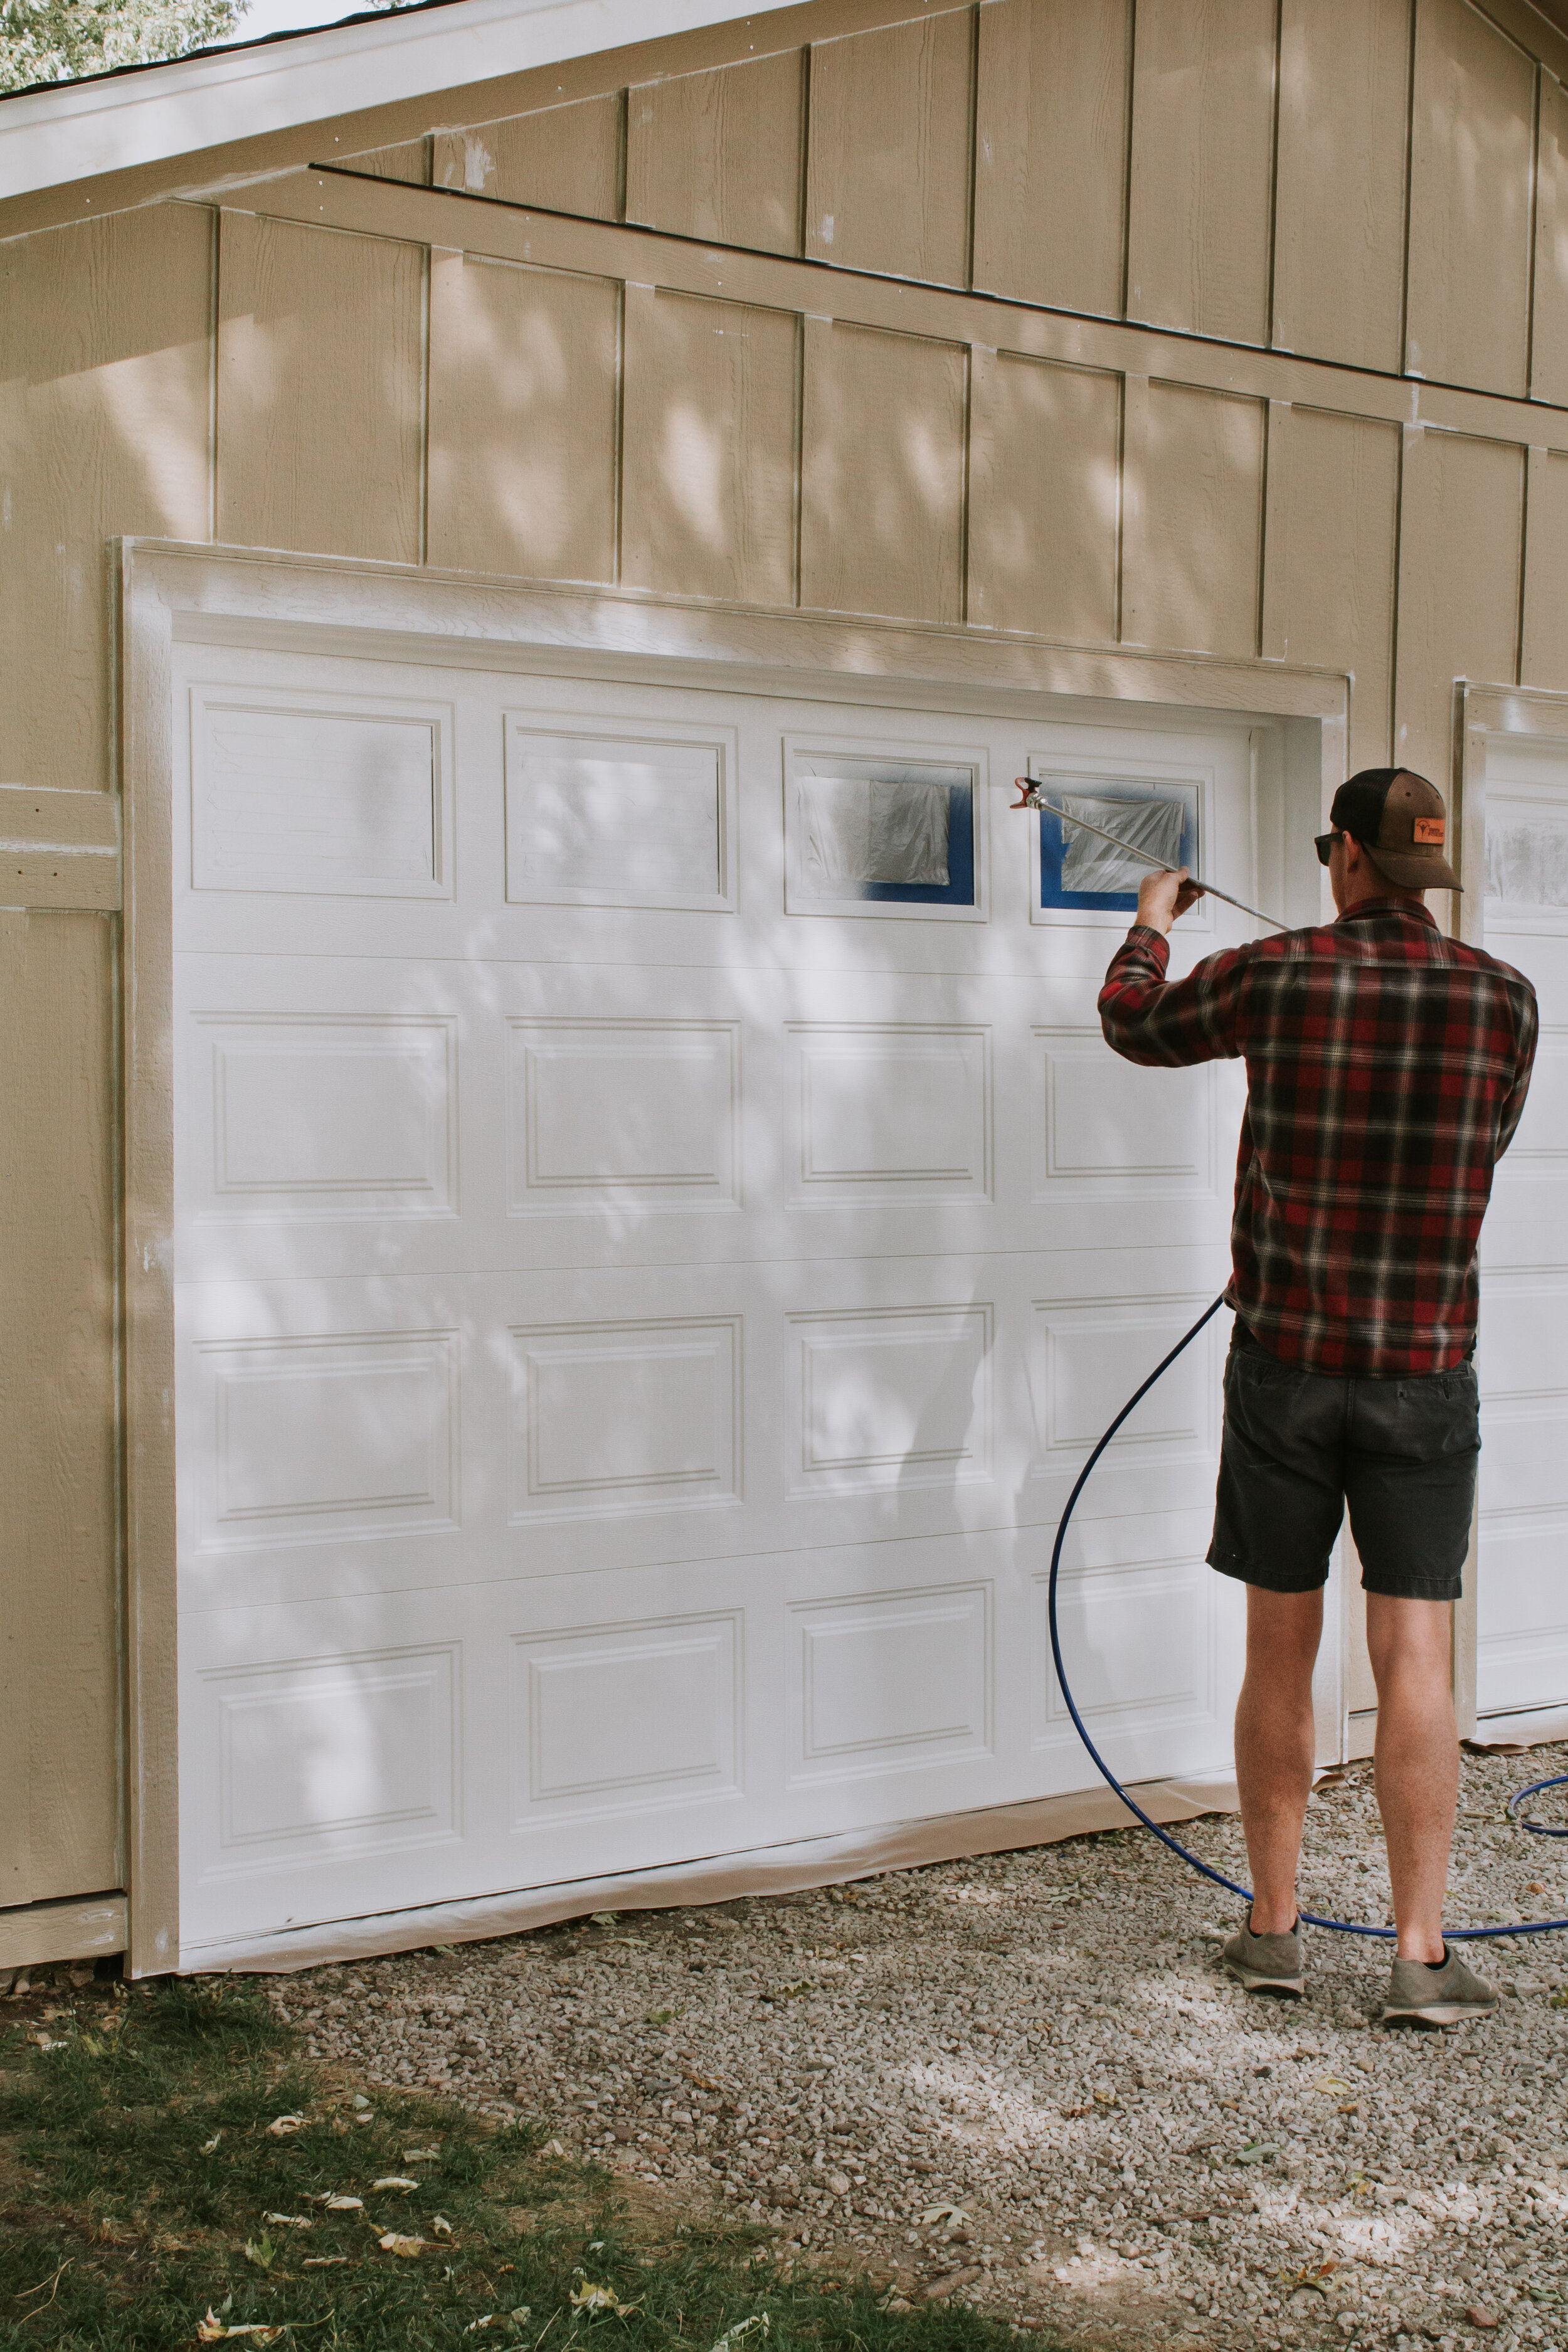 How to paint metal garage doors - Nadine Stay | Tips for painting old garage doors and the paint and primer you should use.